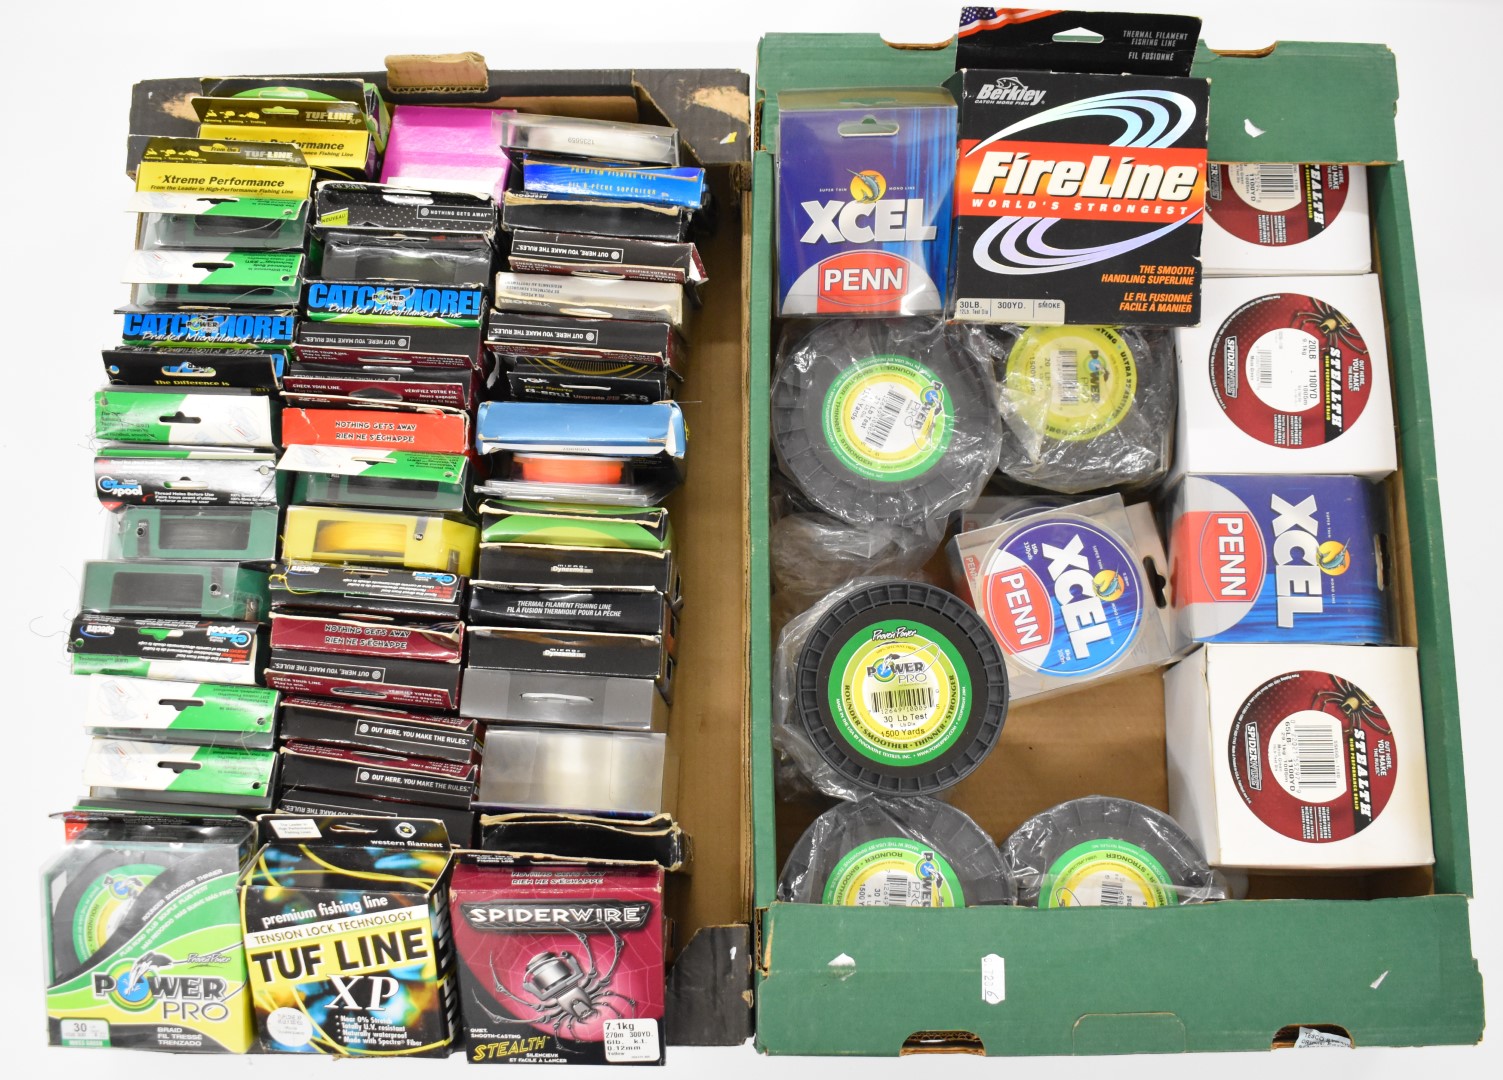 Large quantity of braid and mono fishing line by Penn, Stealth, Power Pro etc, in two trays